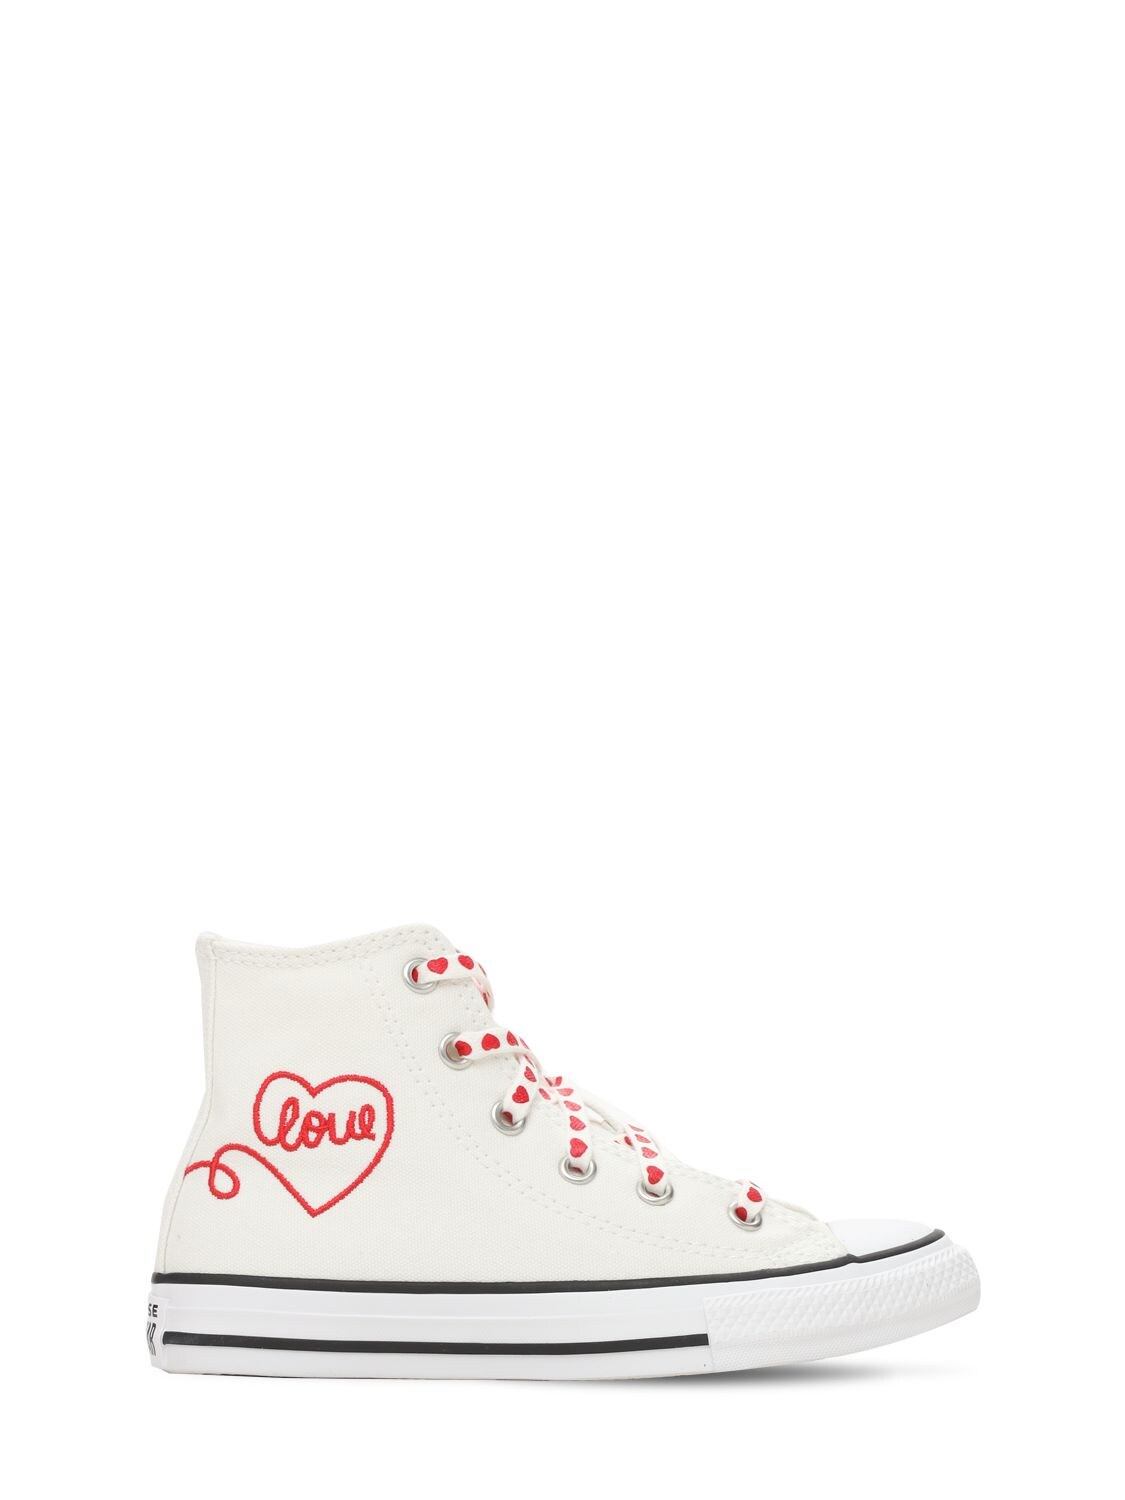 Converse Kids' Chuck Taylor High Sneakers In White